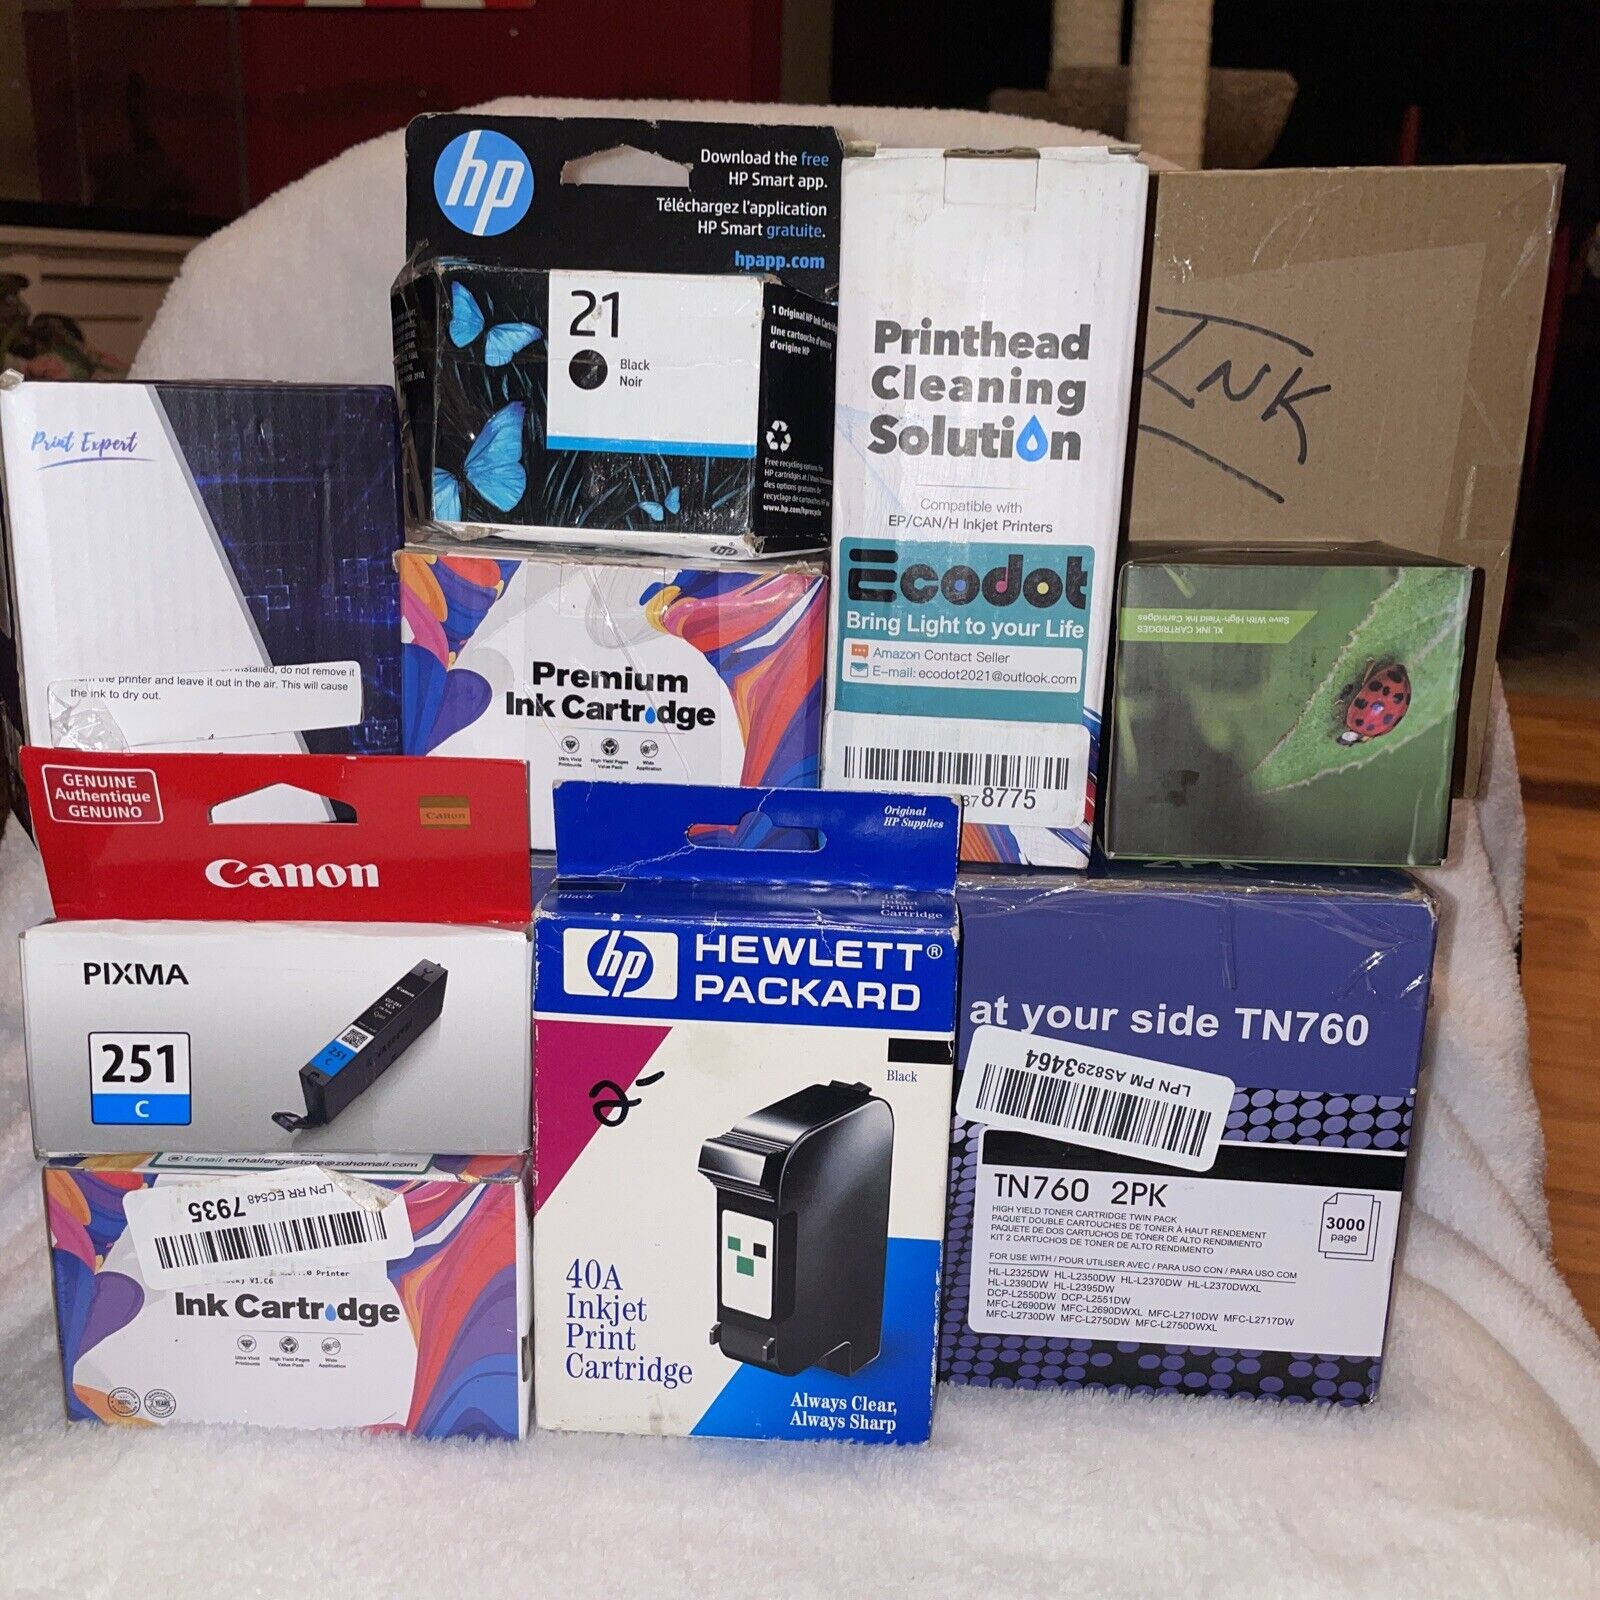 PRINTER INK LOT, 1 Box Of Printhead Cleaning Solution And A Two Pack Of TonerEXP